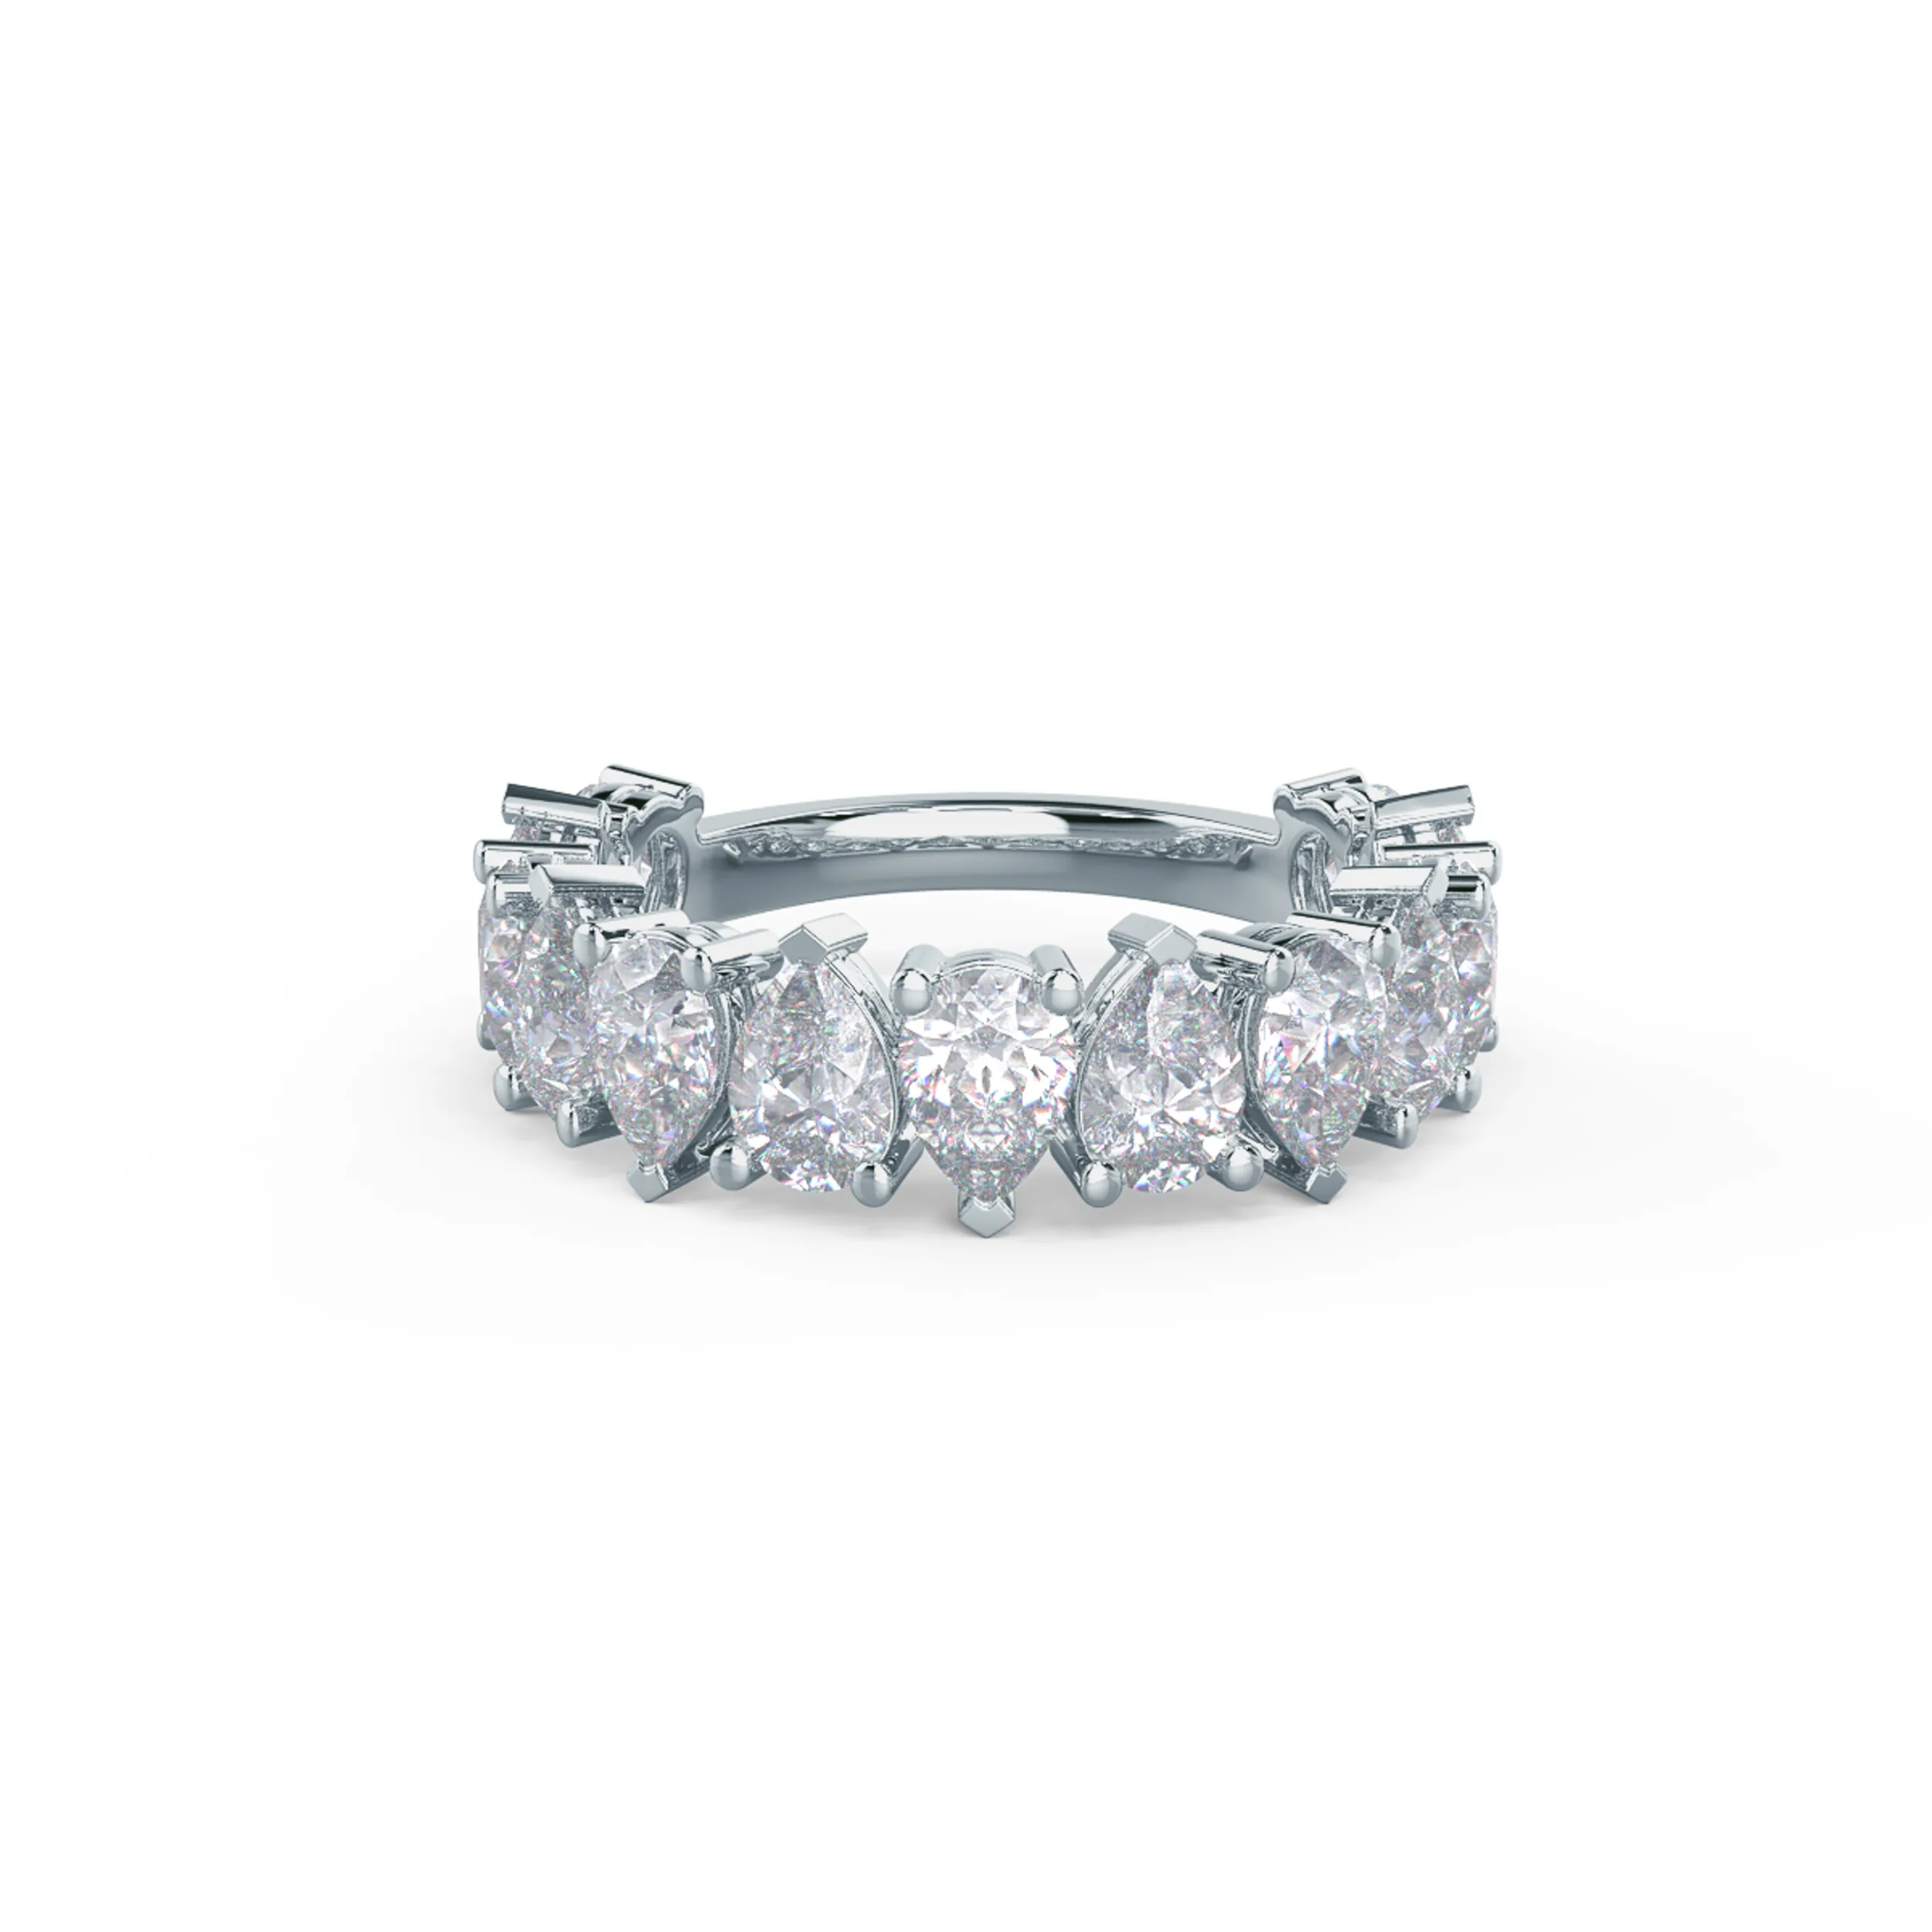 High Quality 2.75 ct Man Made Diamonds set in 18k White Gold Pear Alternating Three Quarter Band (Main View)